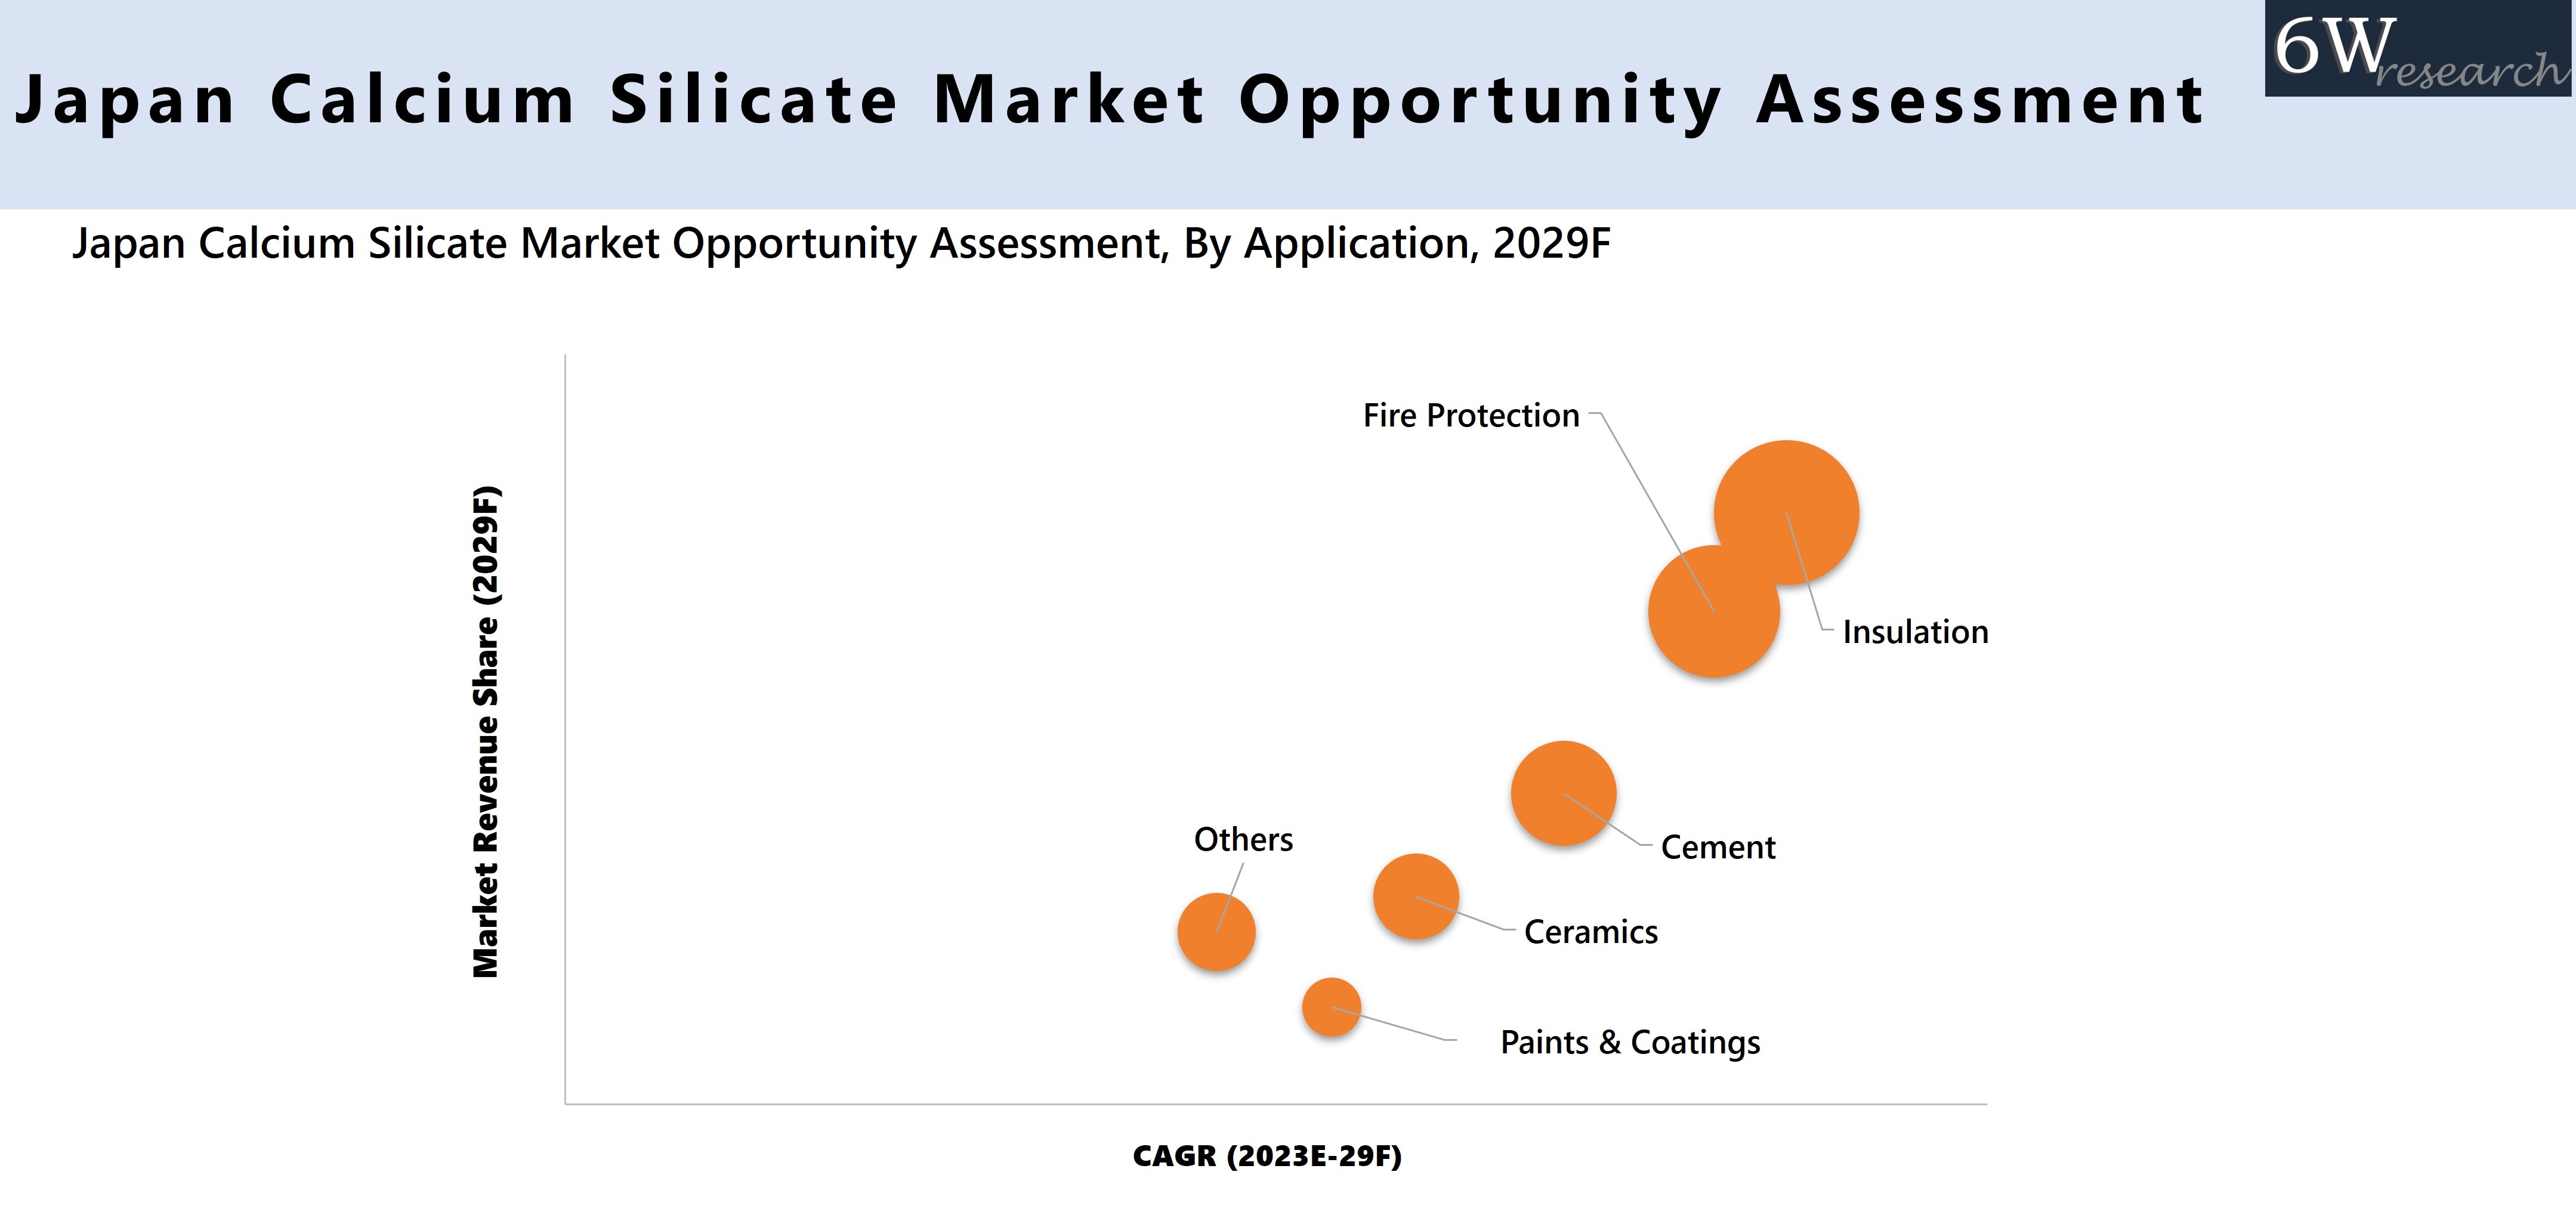 Japan Calcium Silicate Market Opportunity Assessment